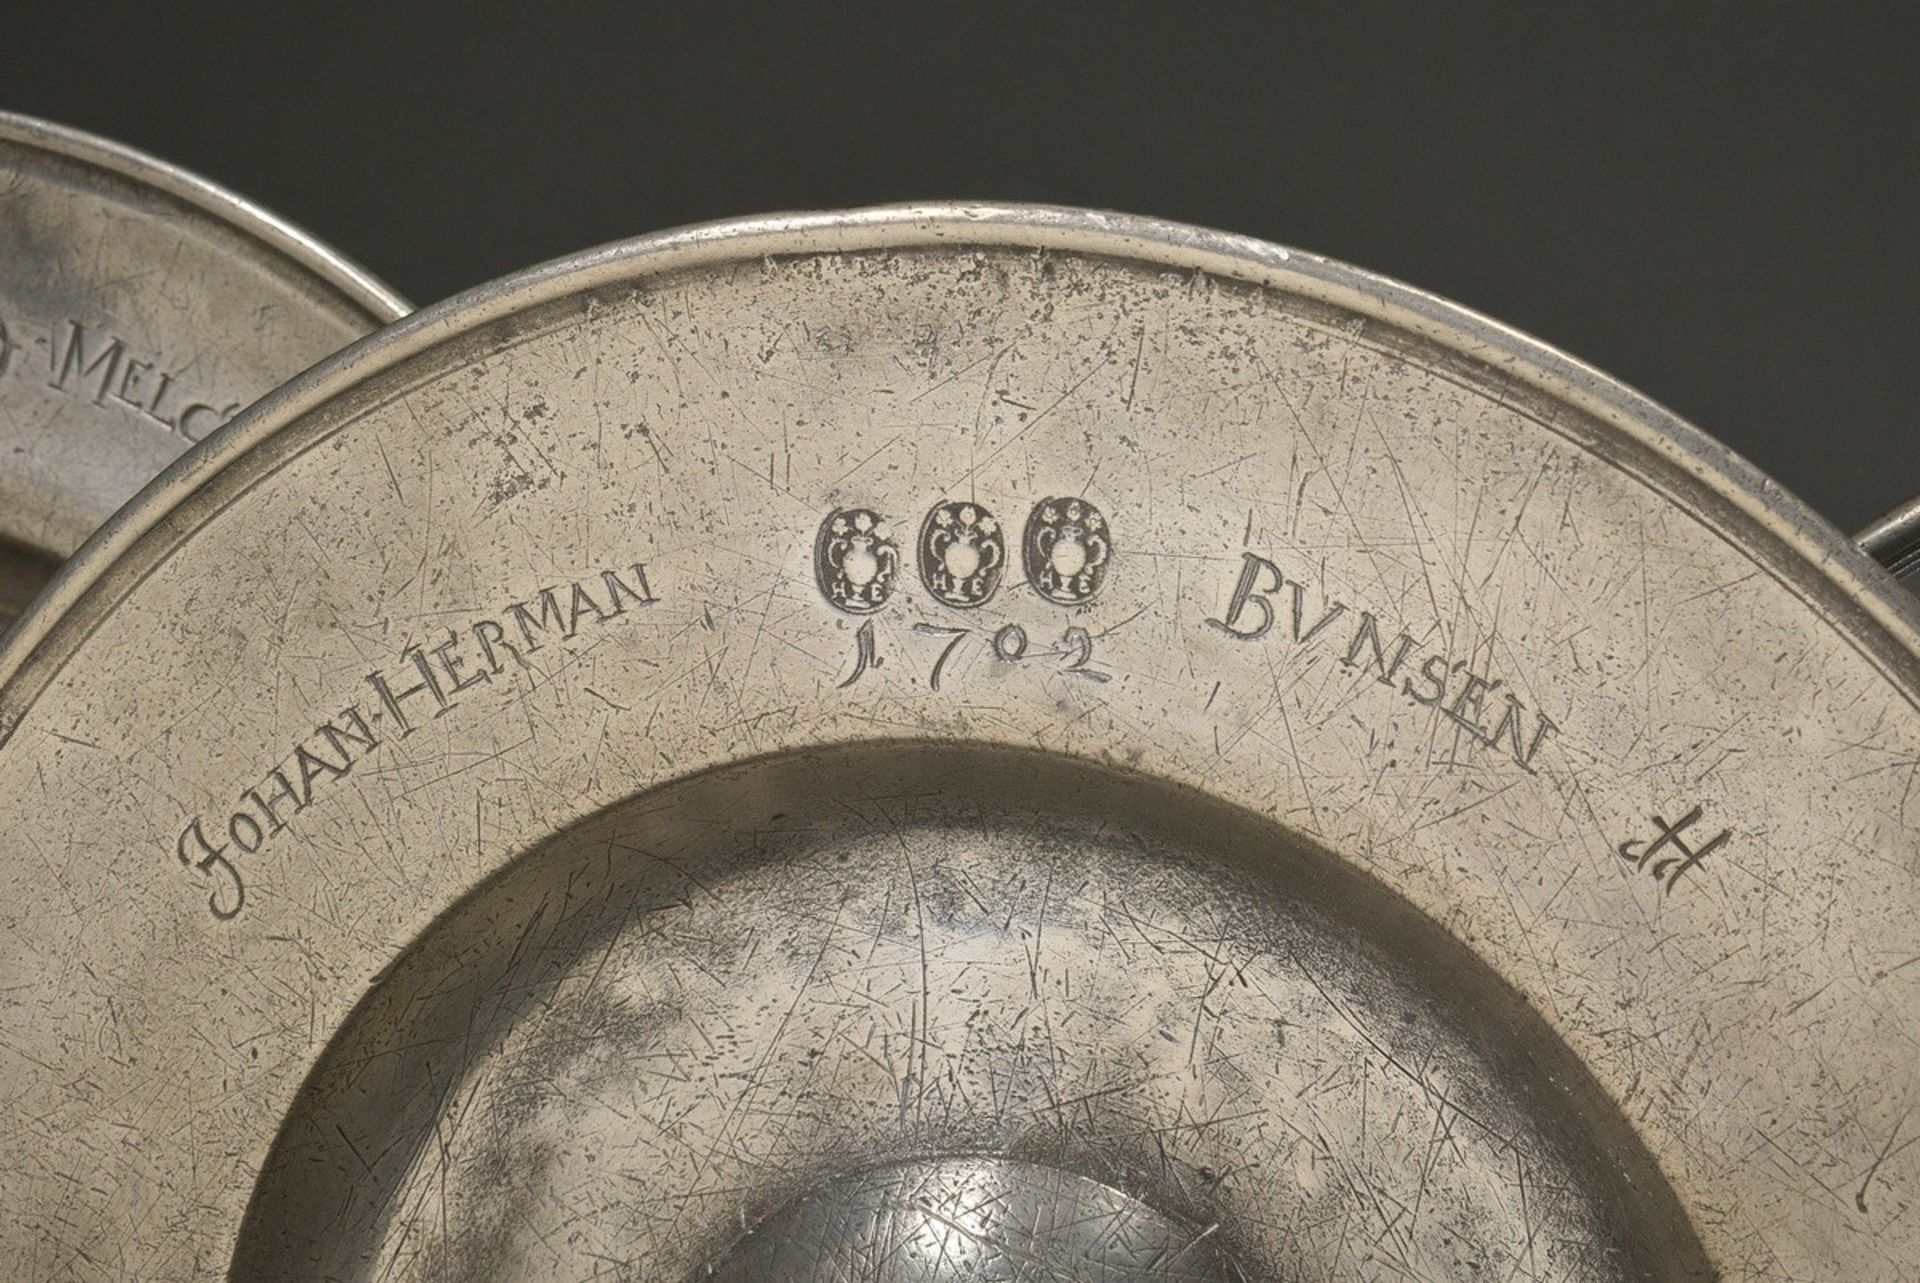 3 pewter wide rim plates with a humped centre, each dated and marked on the rim "A.R.D. Anthon Melc - Image 4 of 8